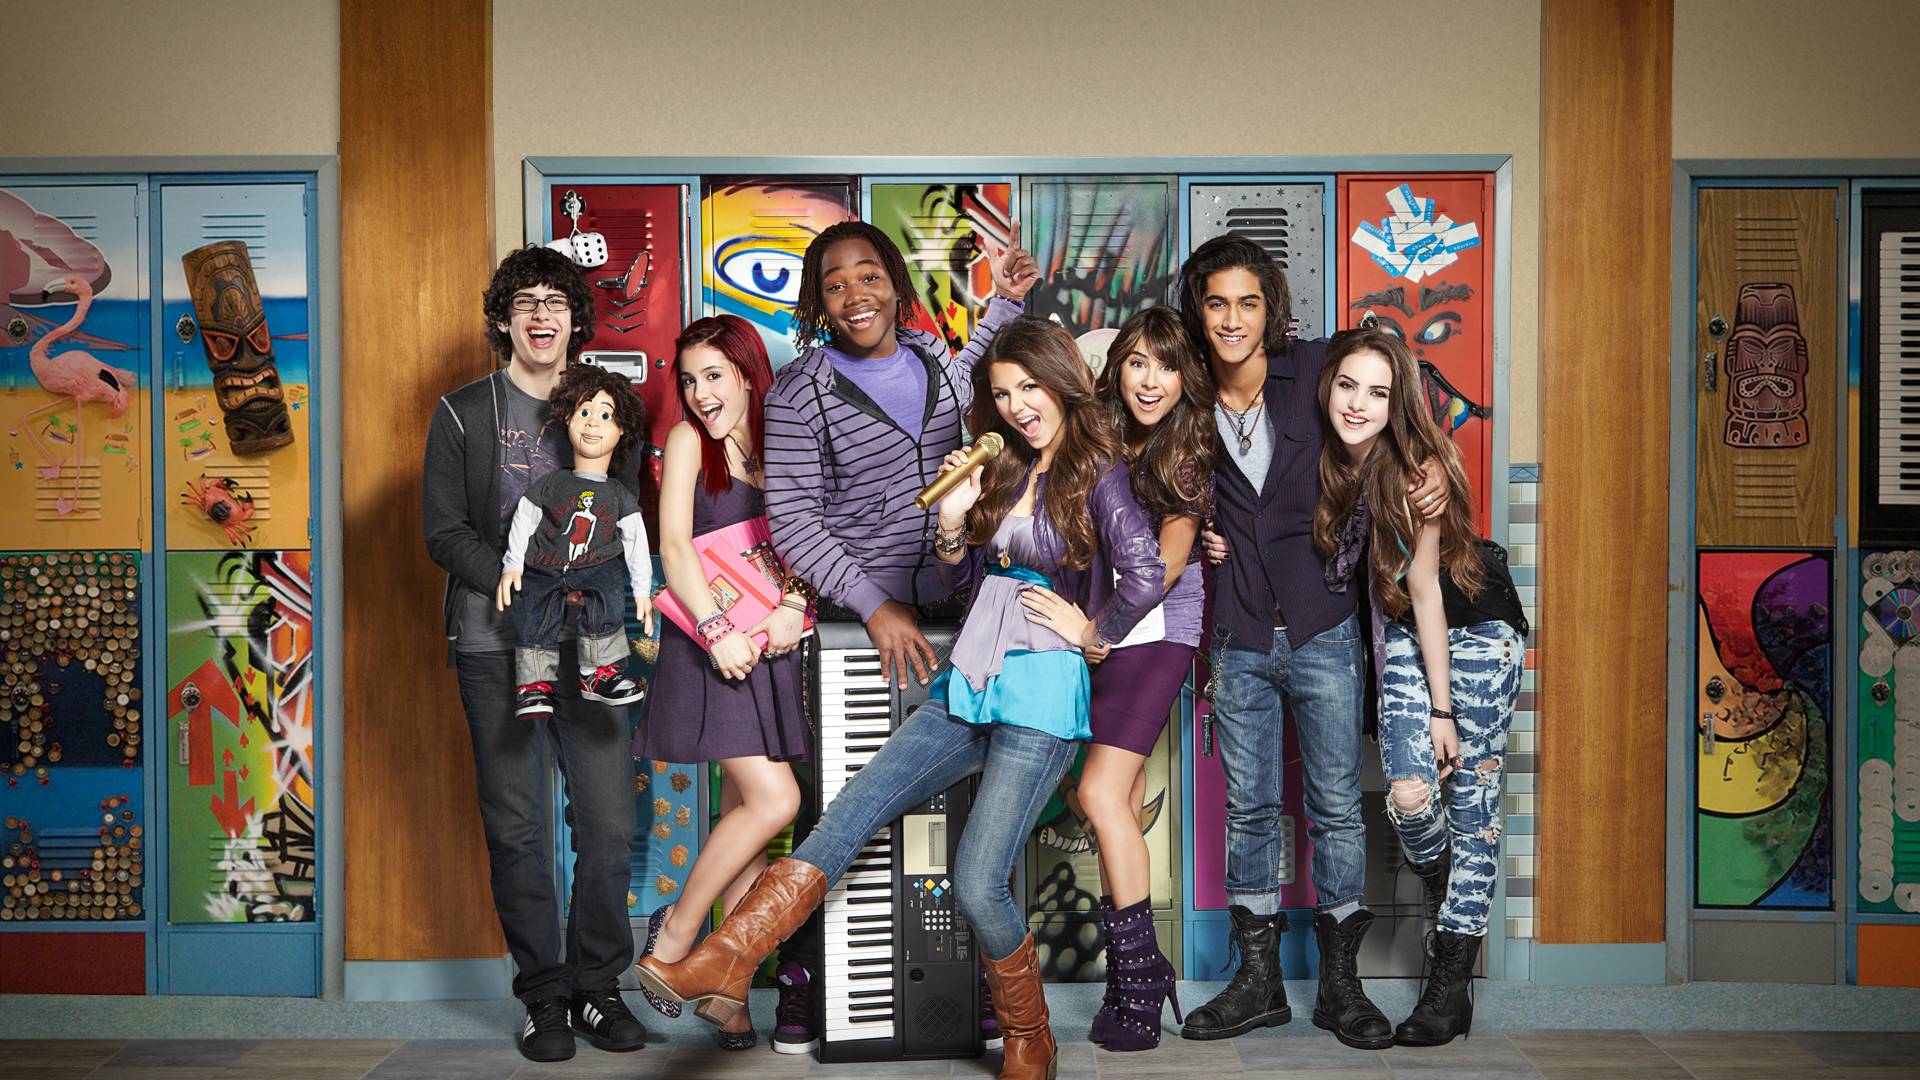 VICTORiOUS - TV Series